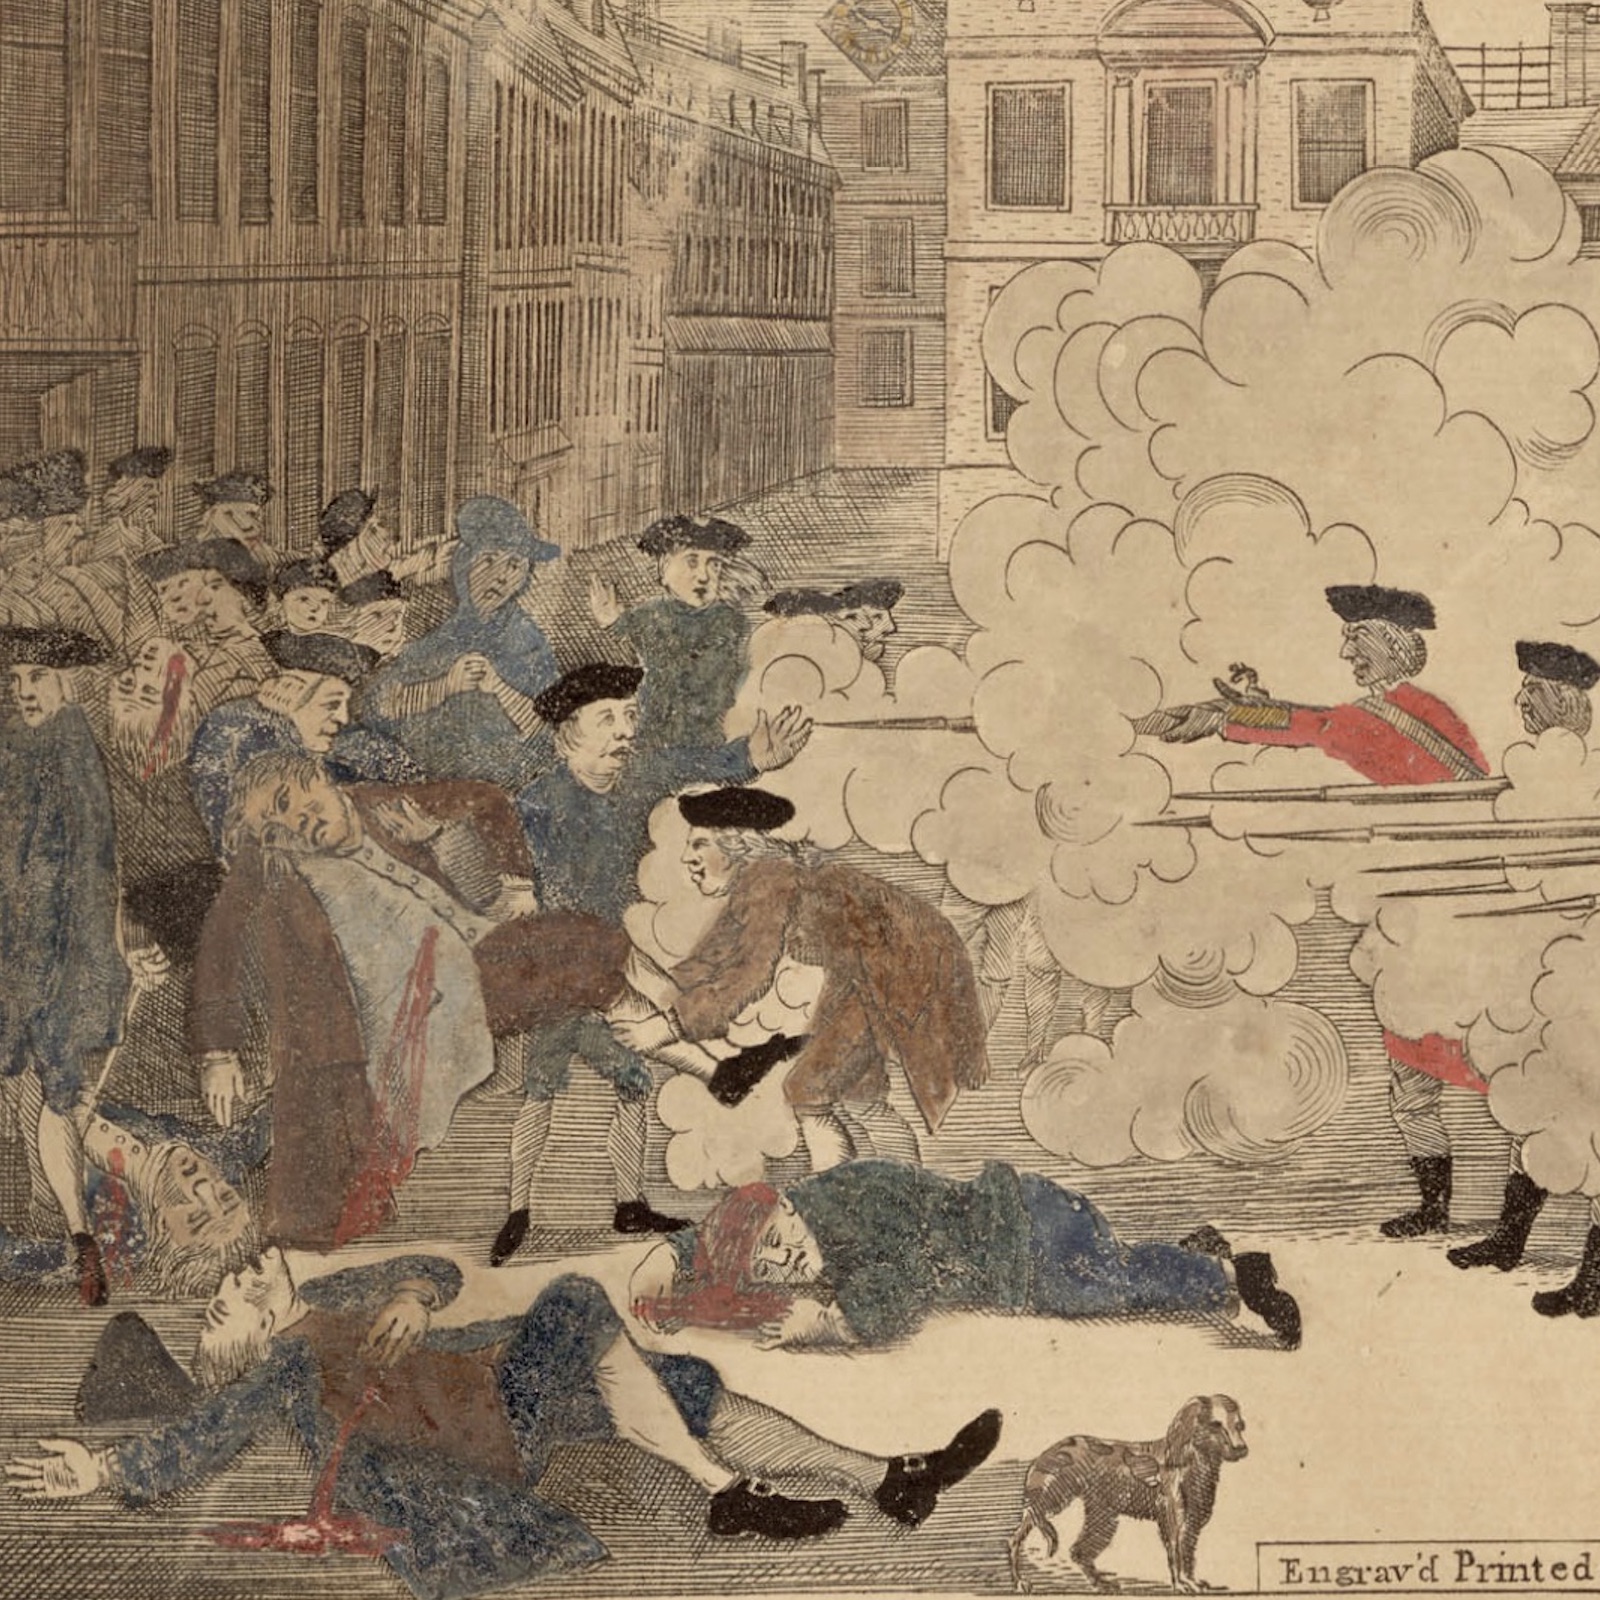 This detail from Paul Revere's engraving of the Boston Massacre is featured in an Imagining the Revolution lesson.